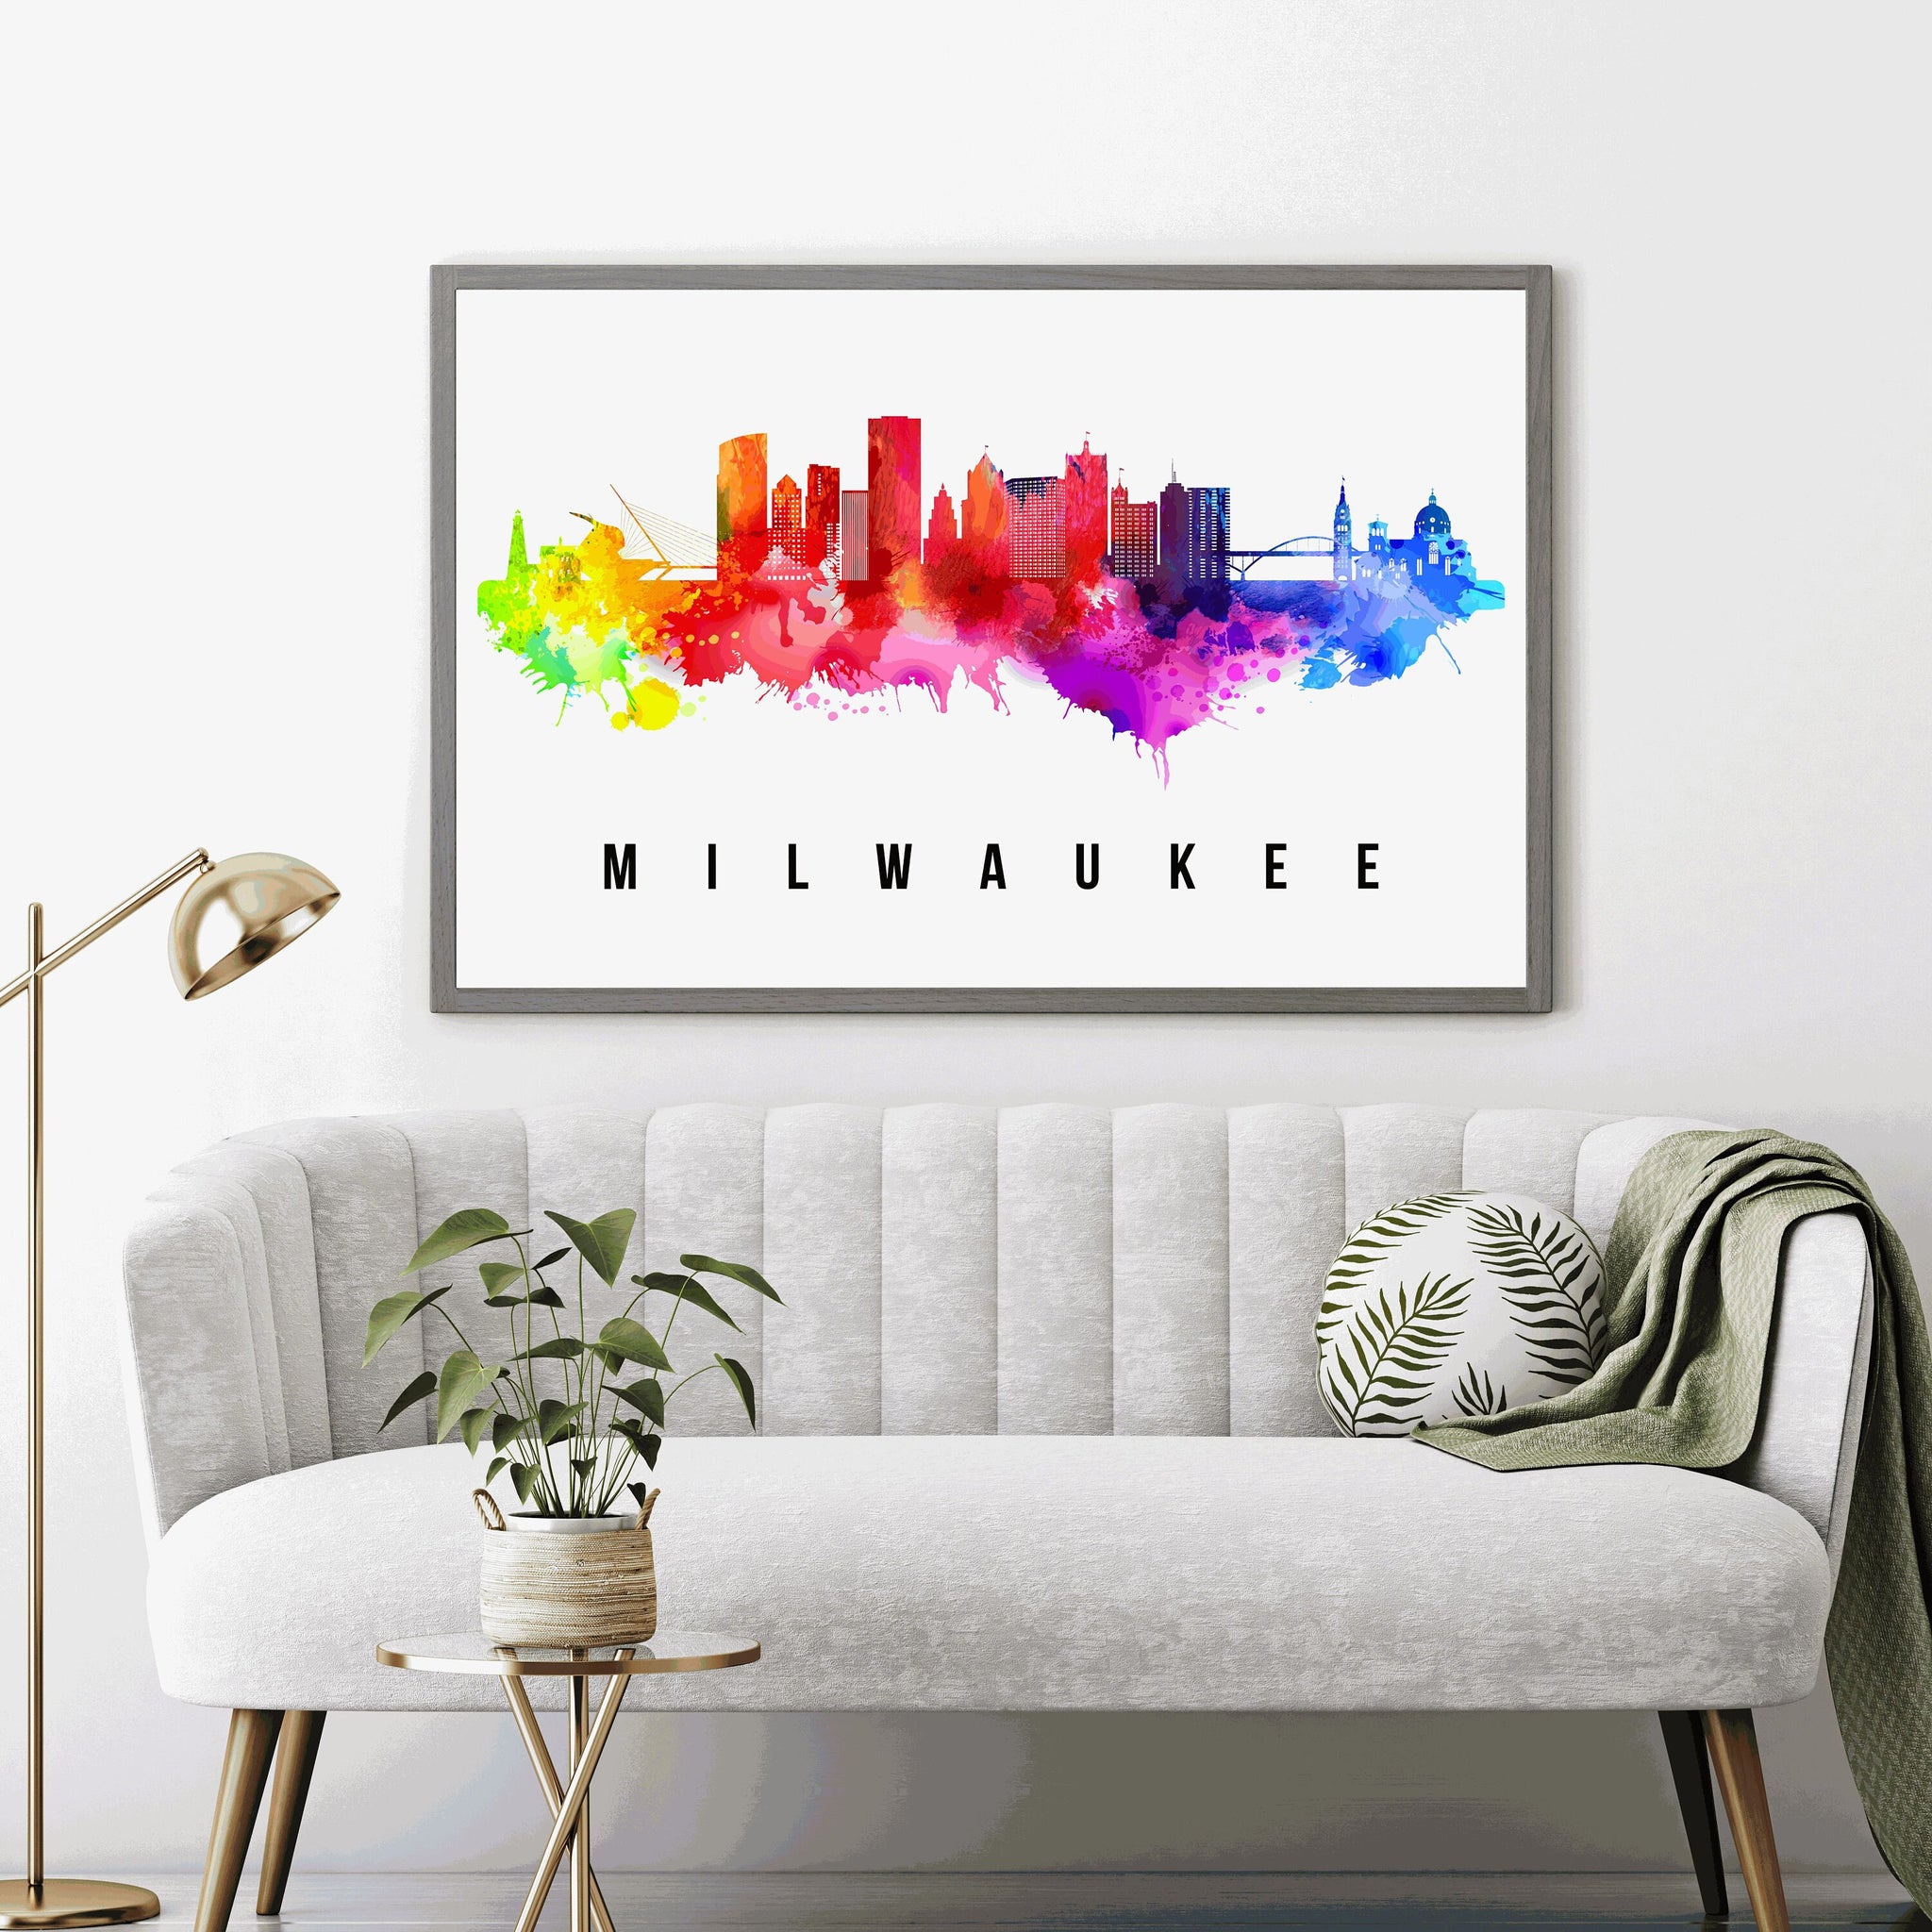 Milwaukee - Wisconsin Poster, Wisconsin Cityscape Painting, Milwaukee Cityscape and Landmark Print, Home Wall Art, Office Wall Decor